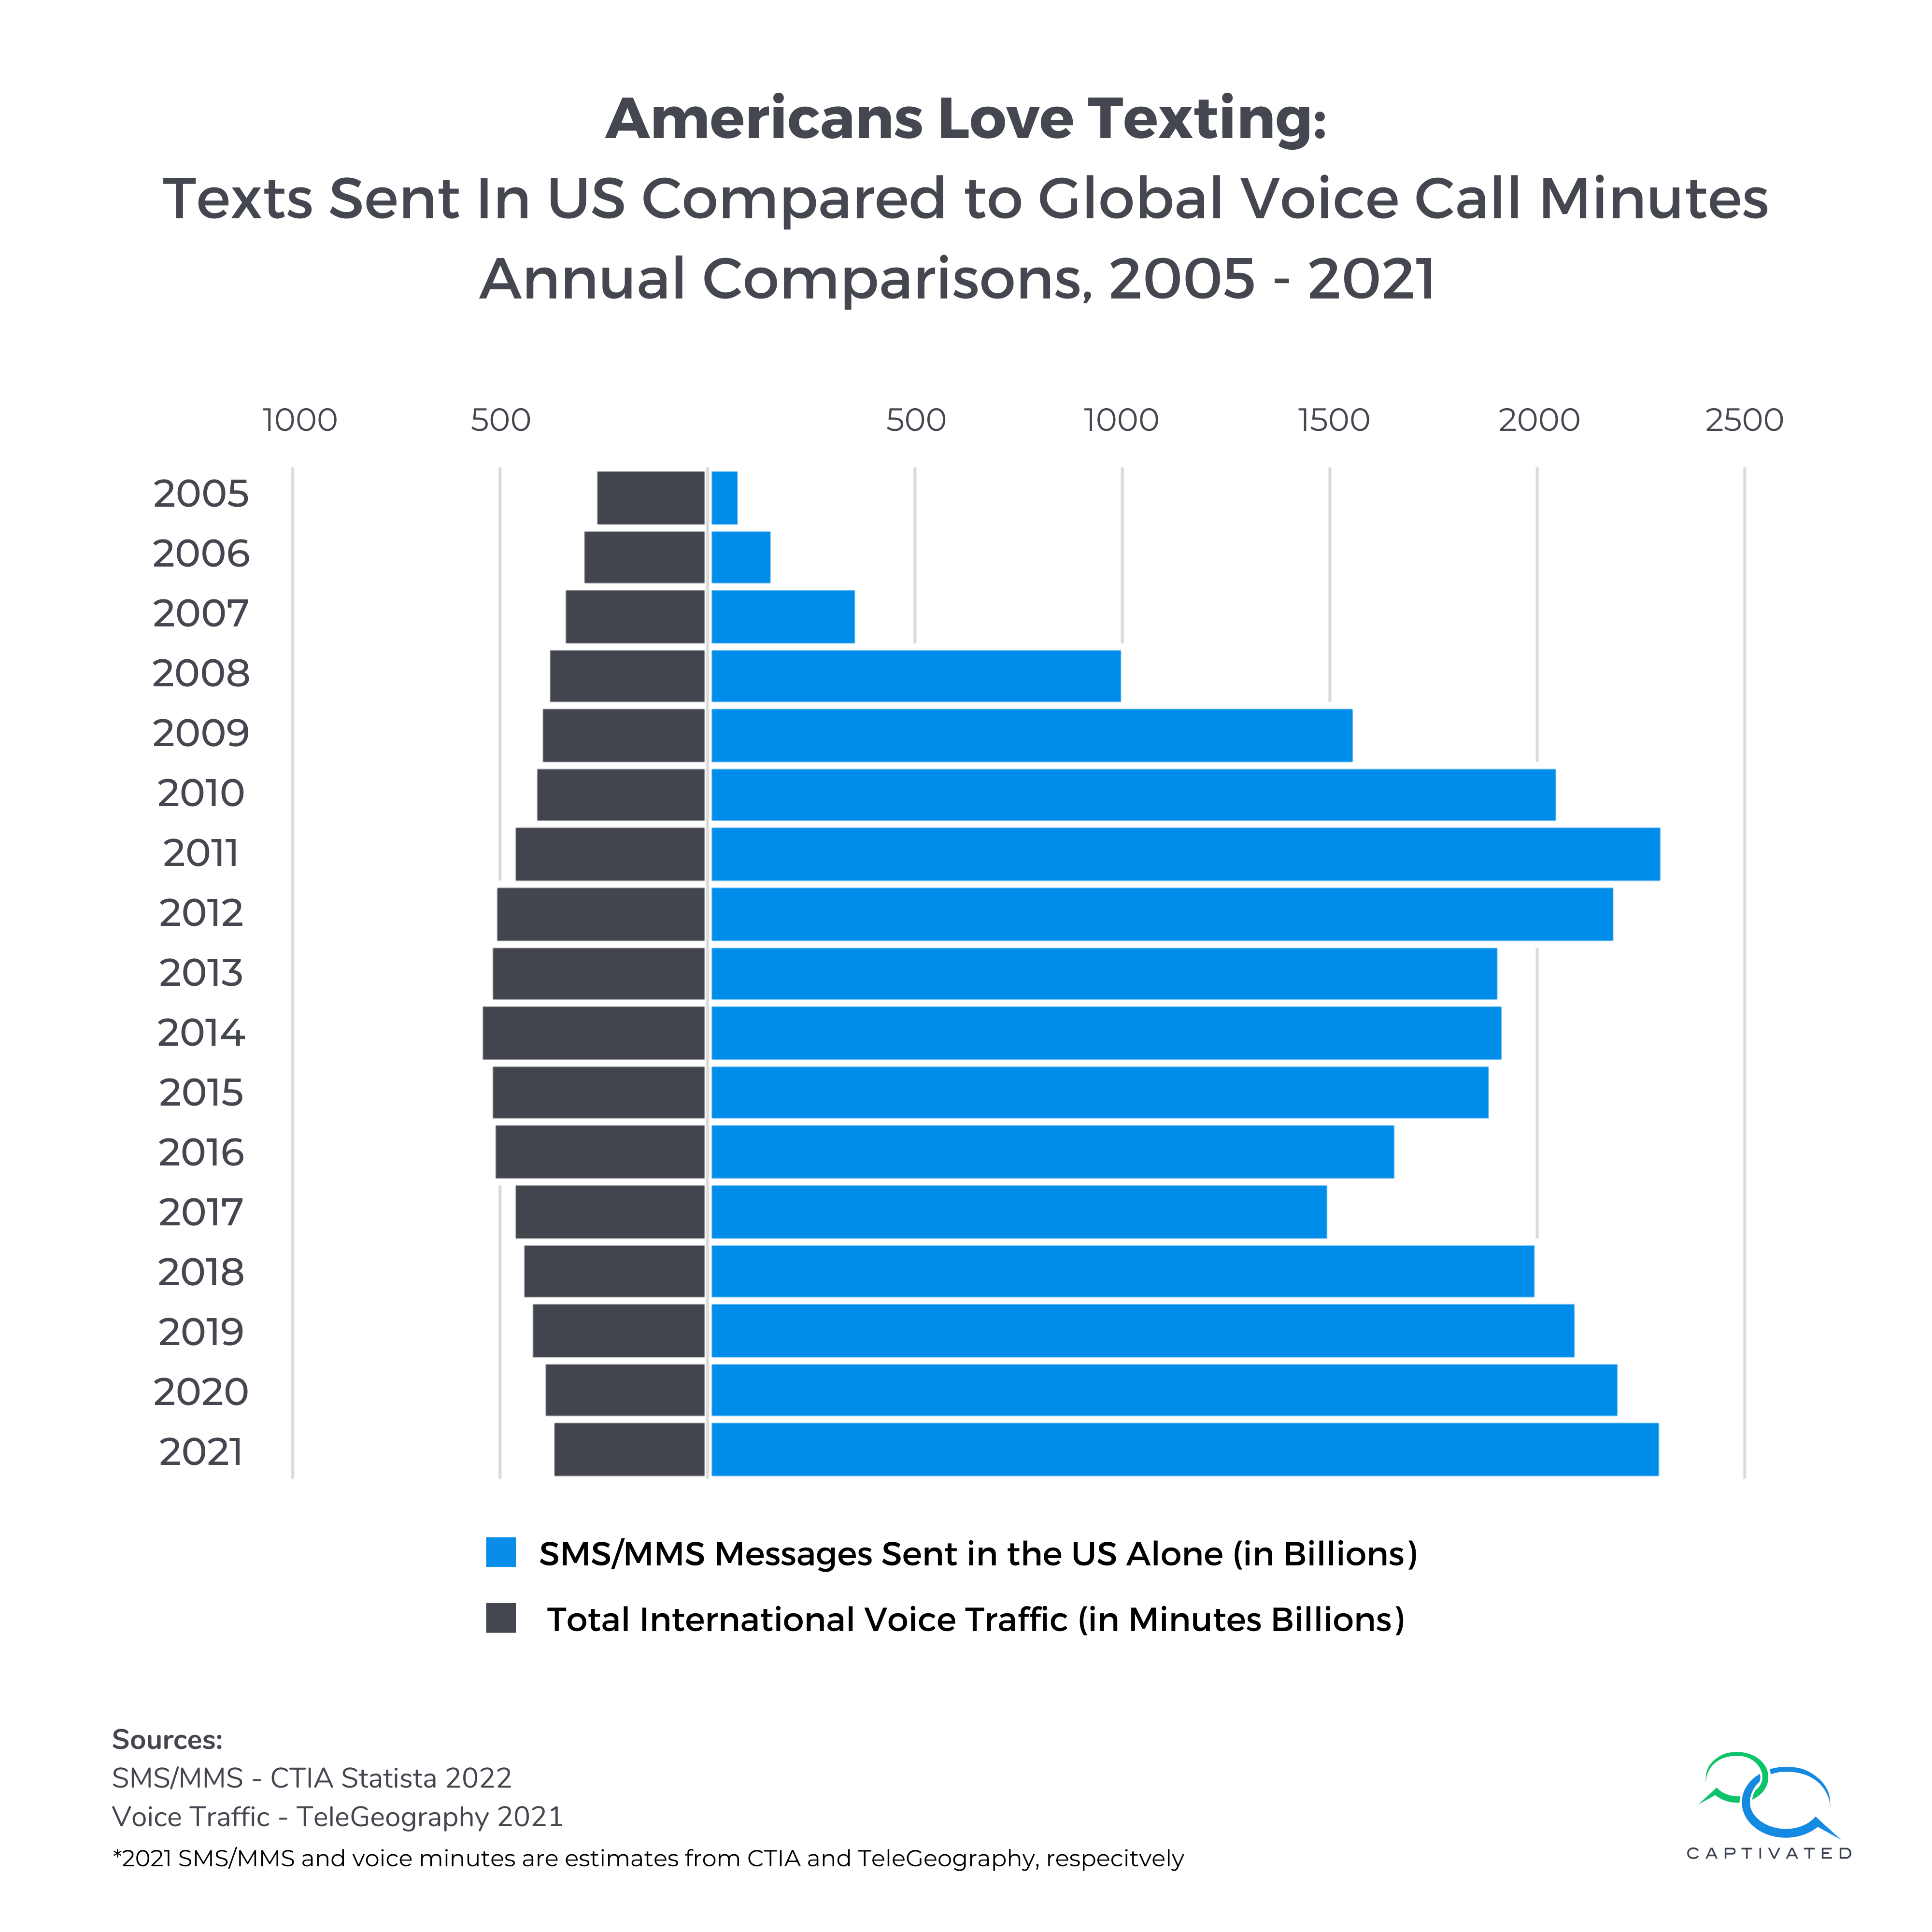 texting statistics comparing sms text messages sent nationwide compared to voice call minutes globally, year over year from 2005 through 2021